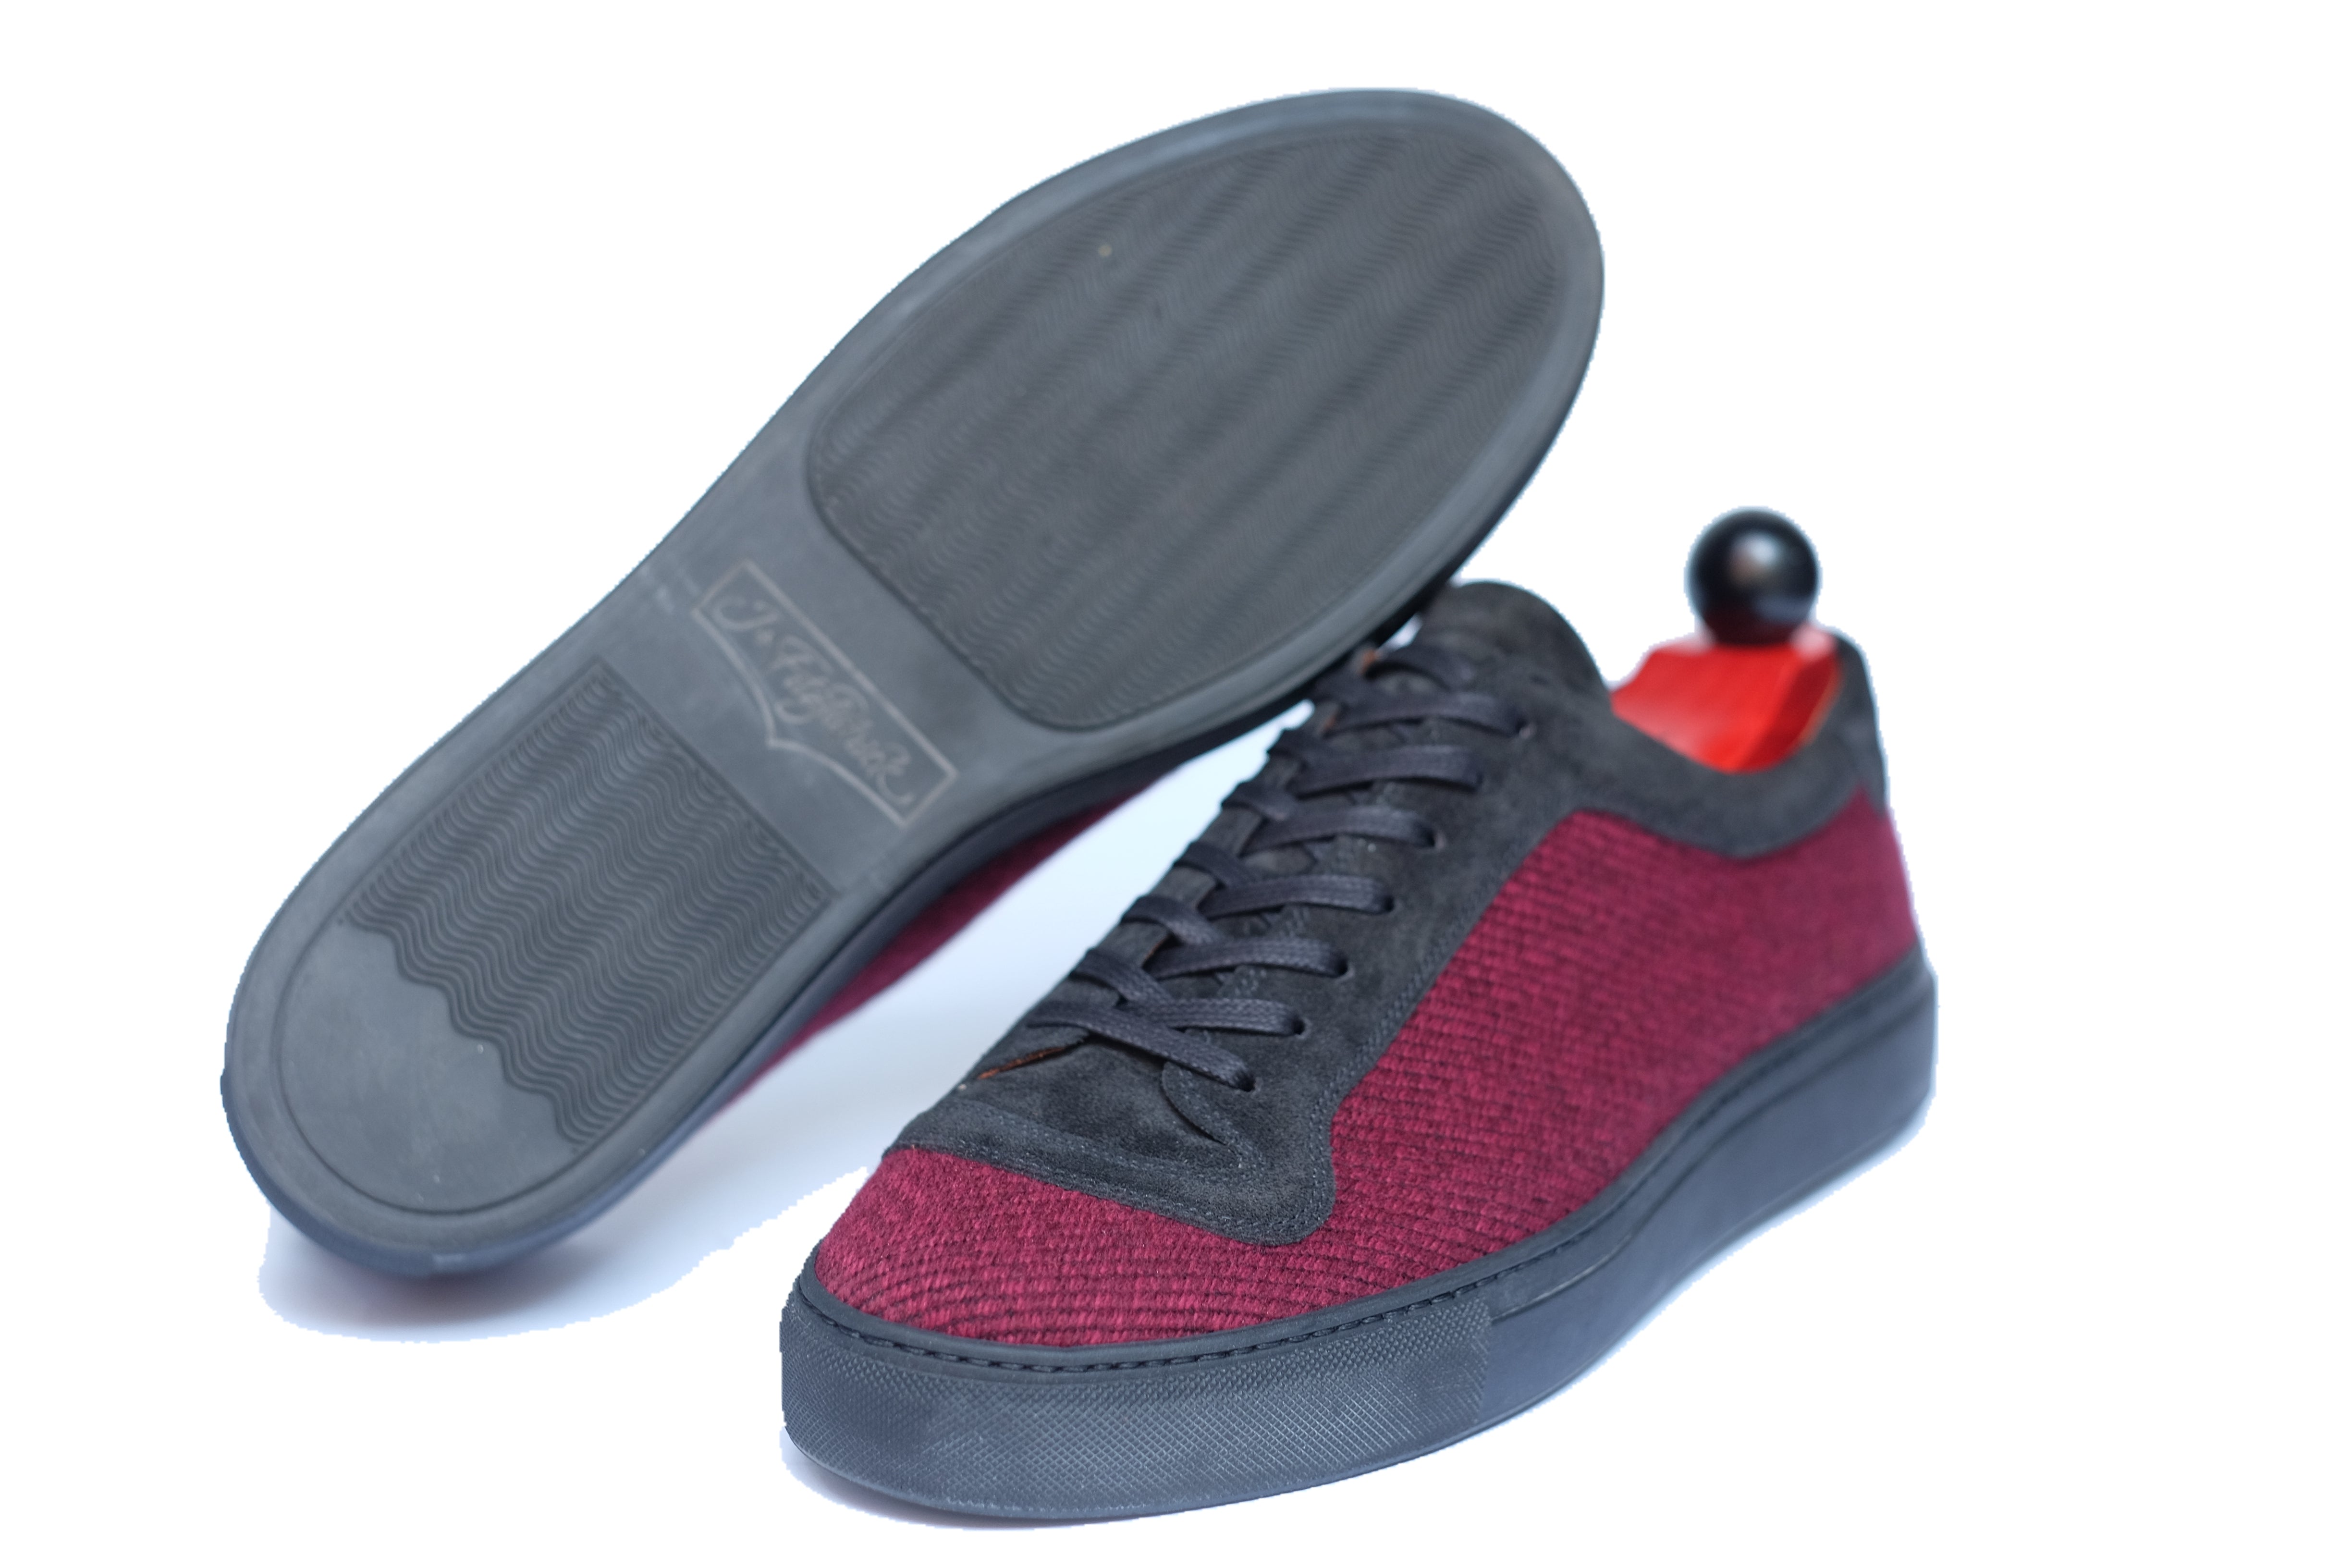 Woodinville - Red Poulsbo Tweed / Black Suede